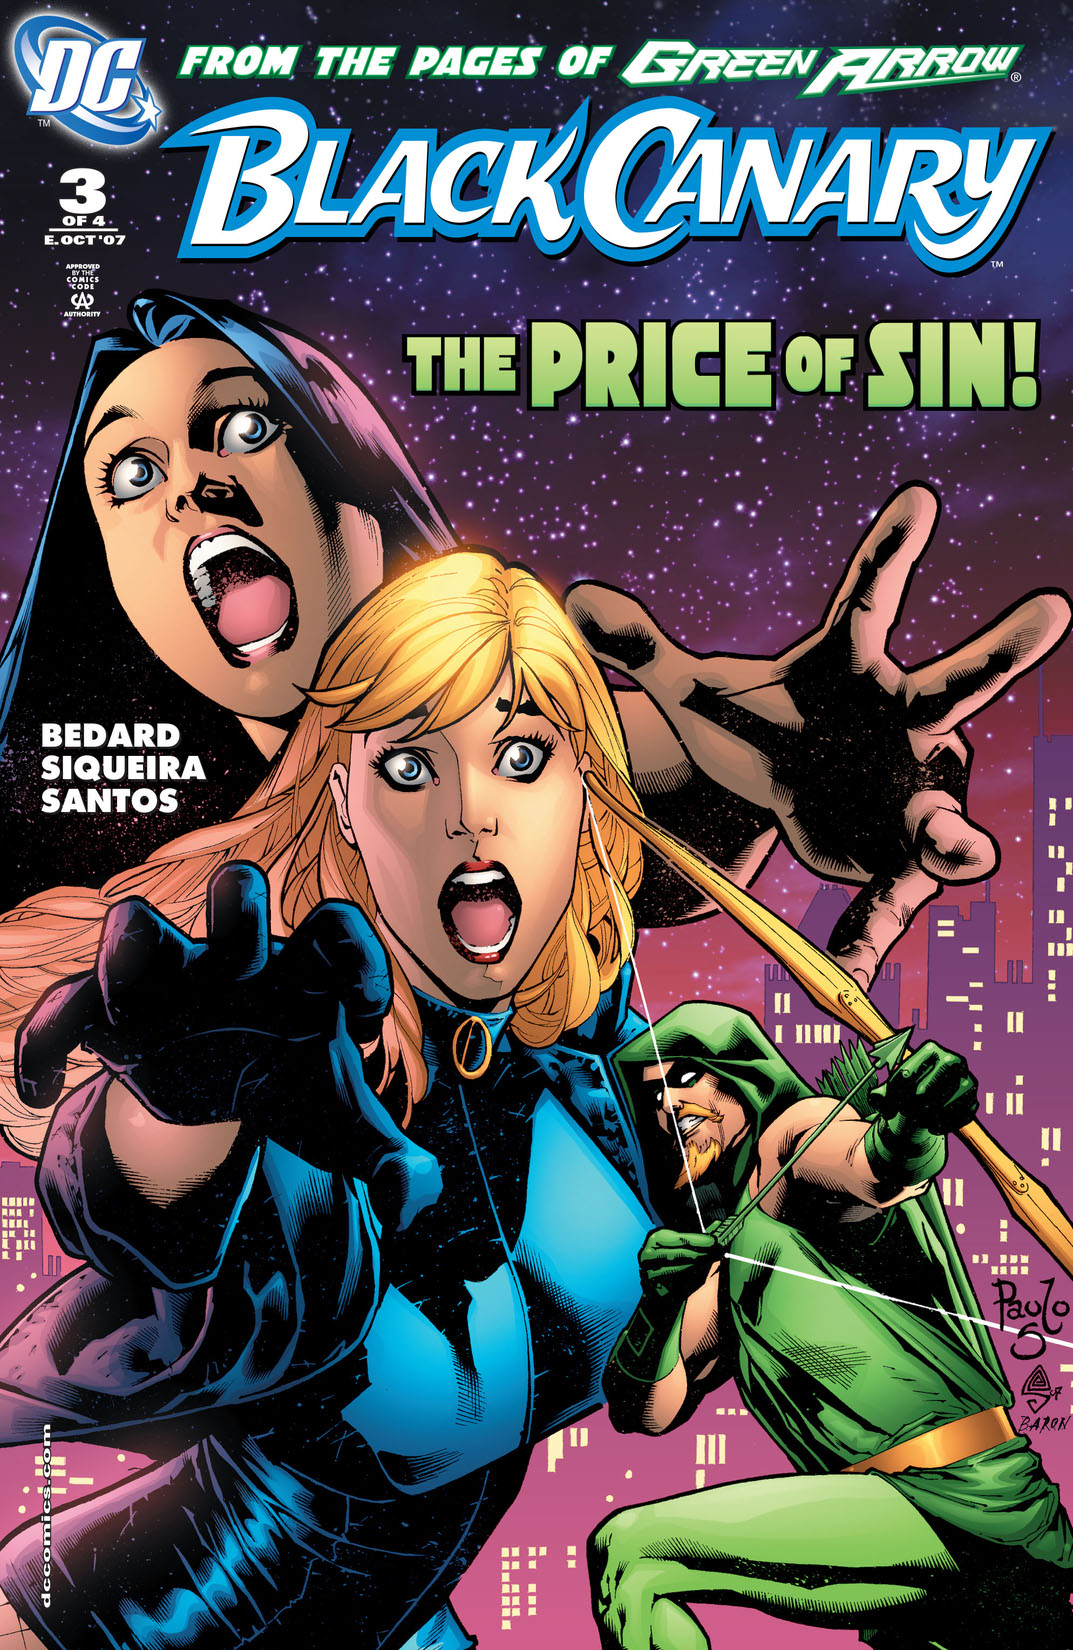 Black Canary (2007-) #3 preview images